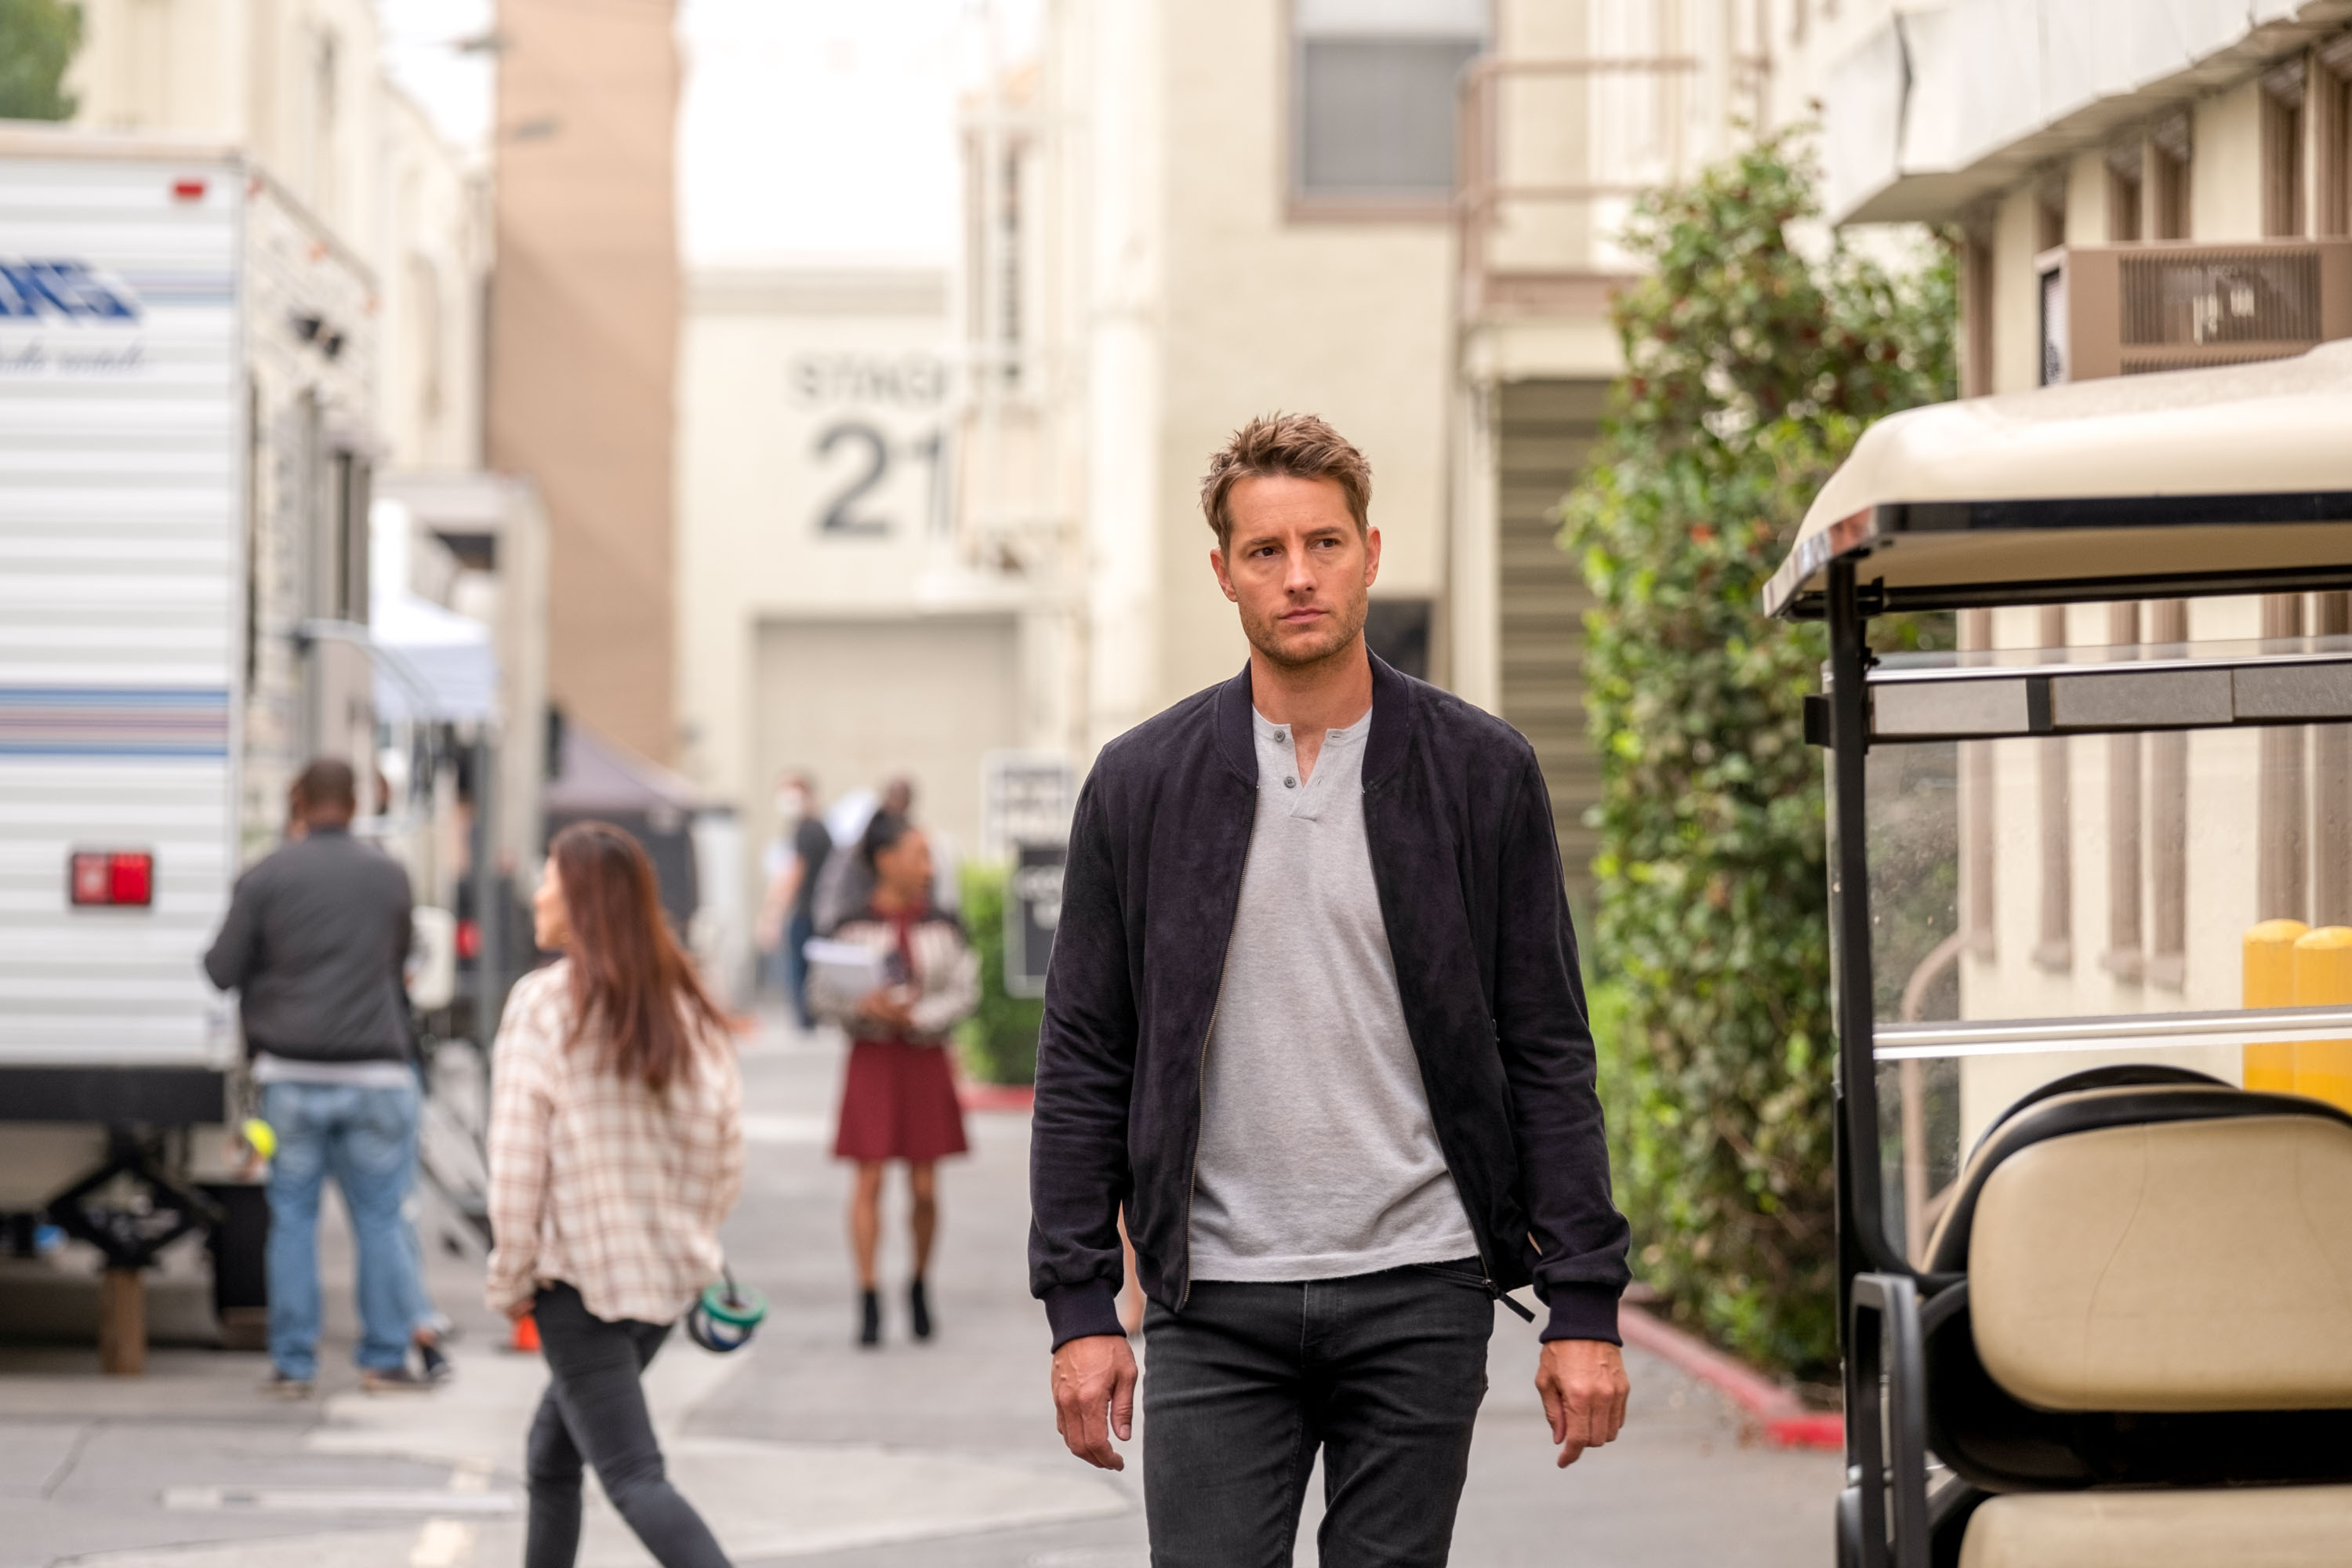 'This Is Us' star Justin Hartley, in character as Kevin Pearson, wears a black jacket over a light gray shirt and black pants while walking through a production studio.